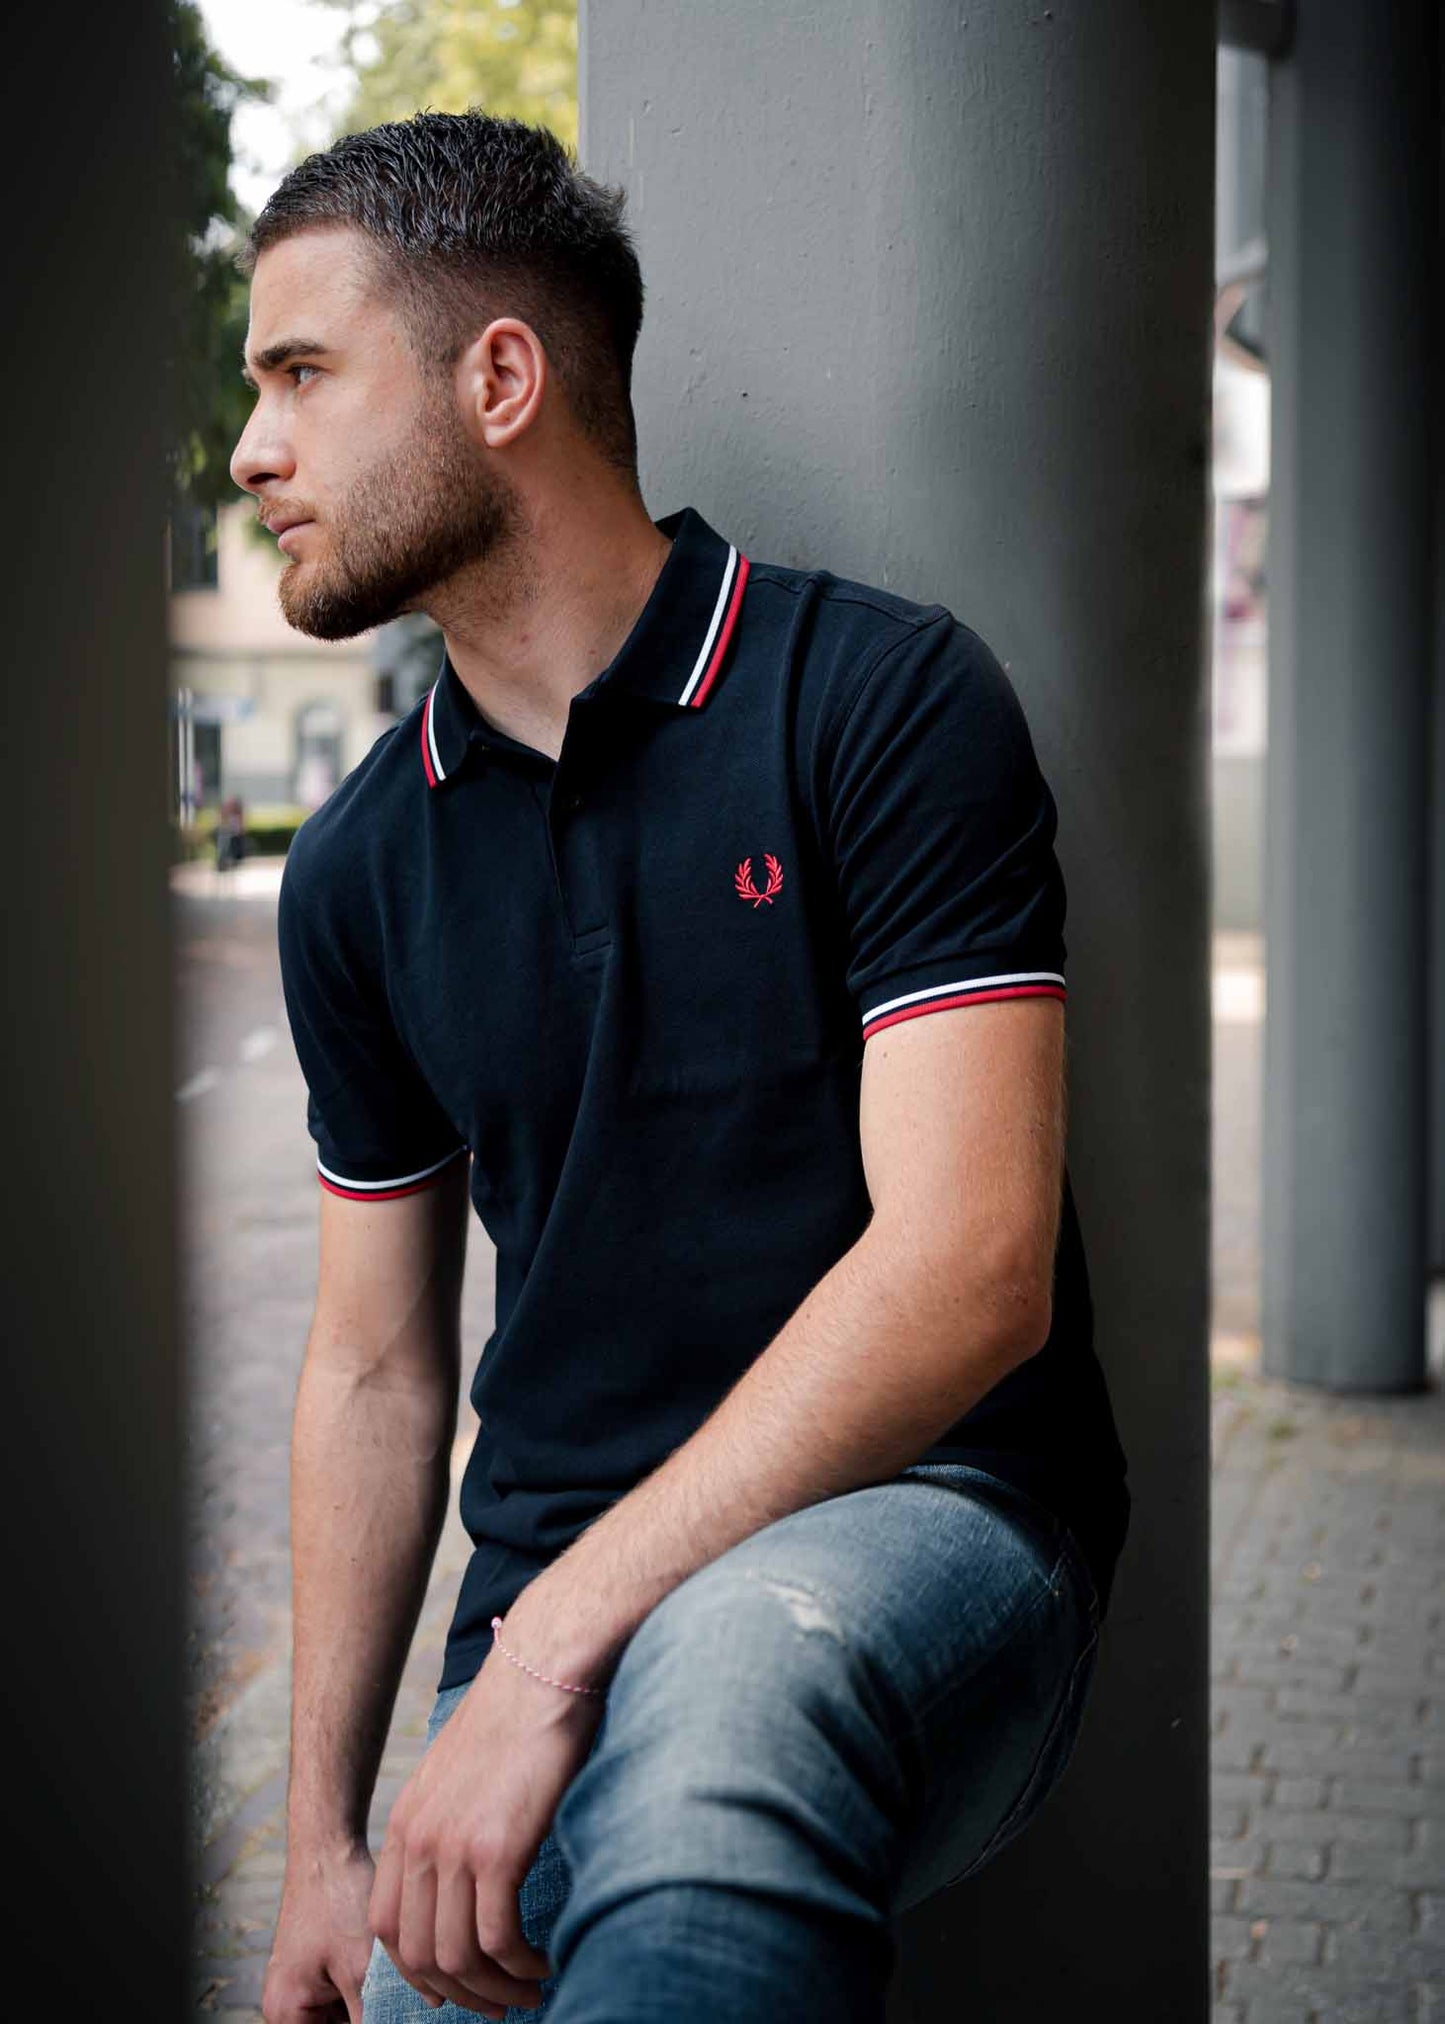 Twin tipped fred perry shirt - navy white red